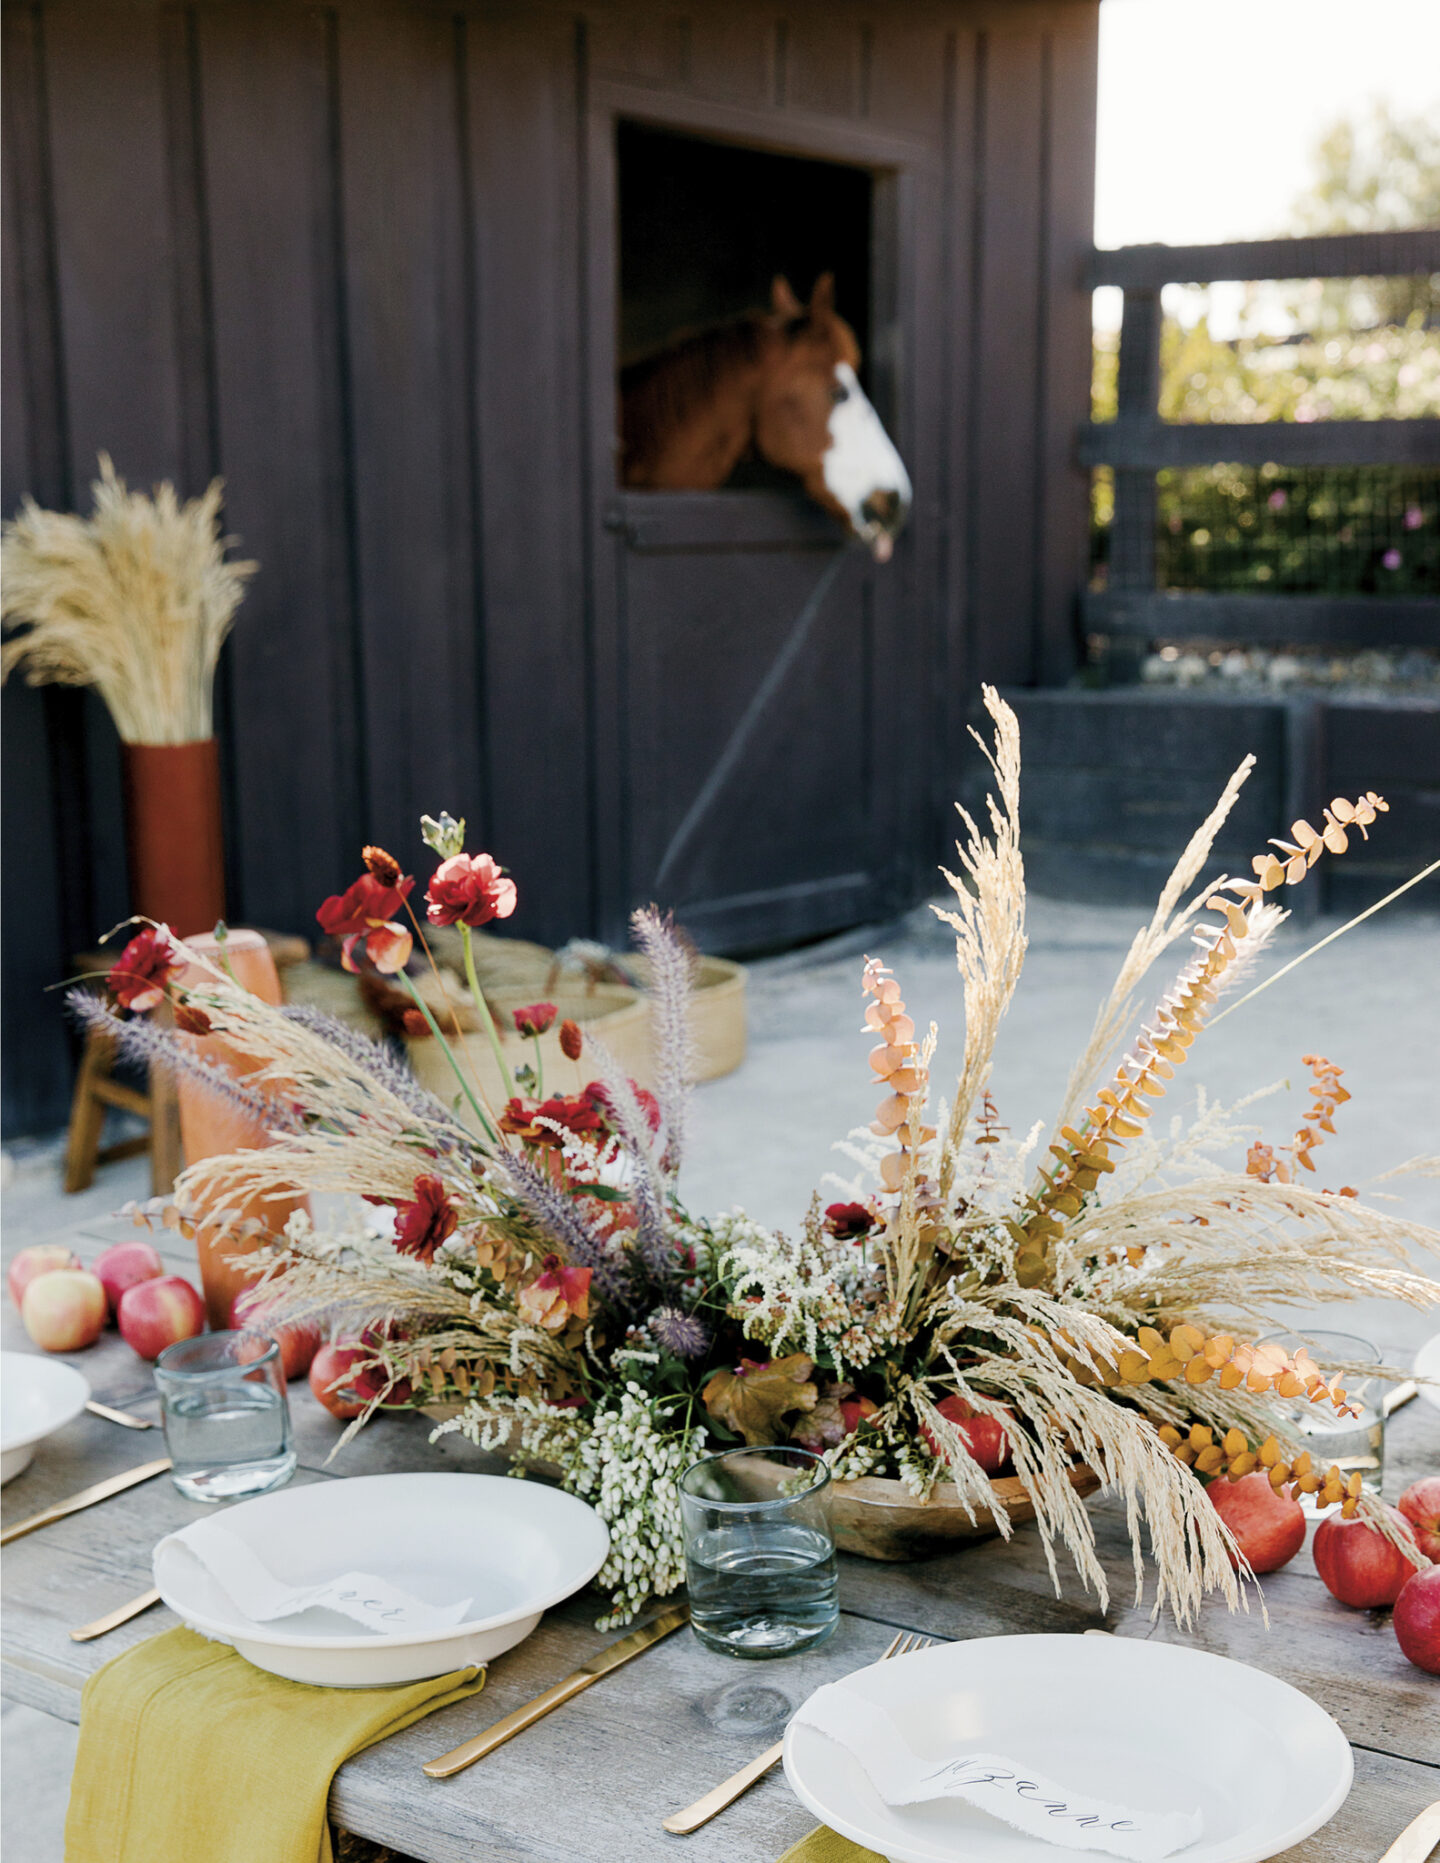 Earthy organic outdoor tablescape by Jenni Kayne for PACIFIC NATURAL - a must own lifestyle book with recipes.